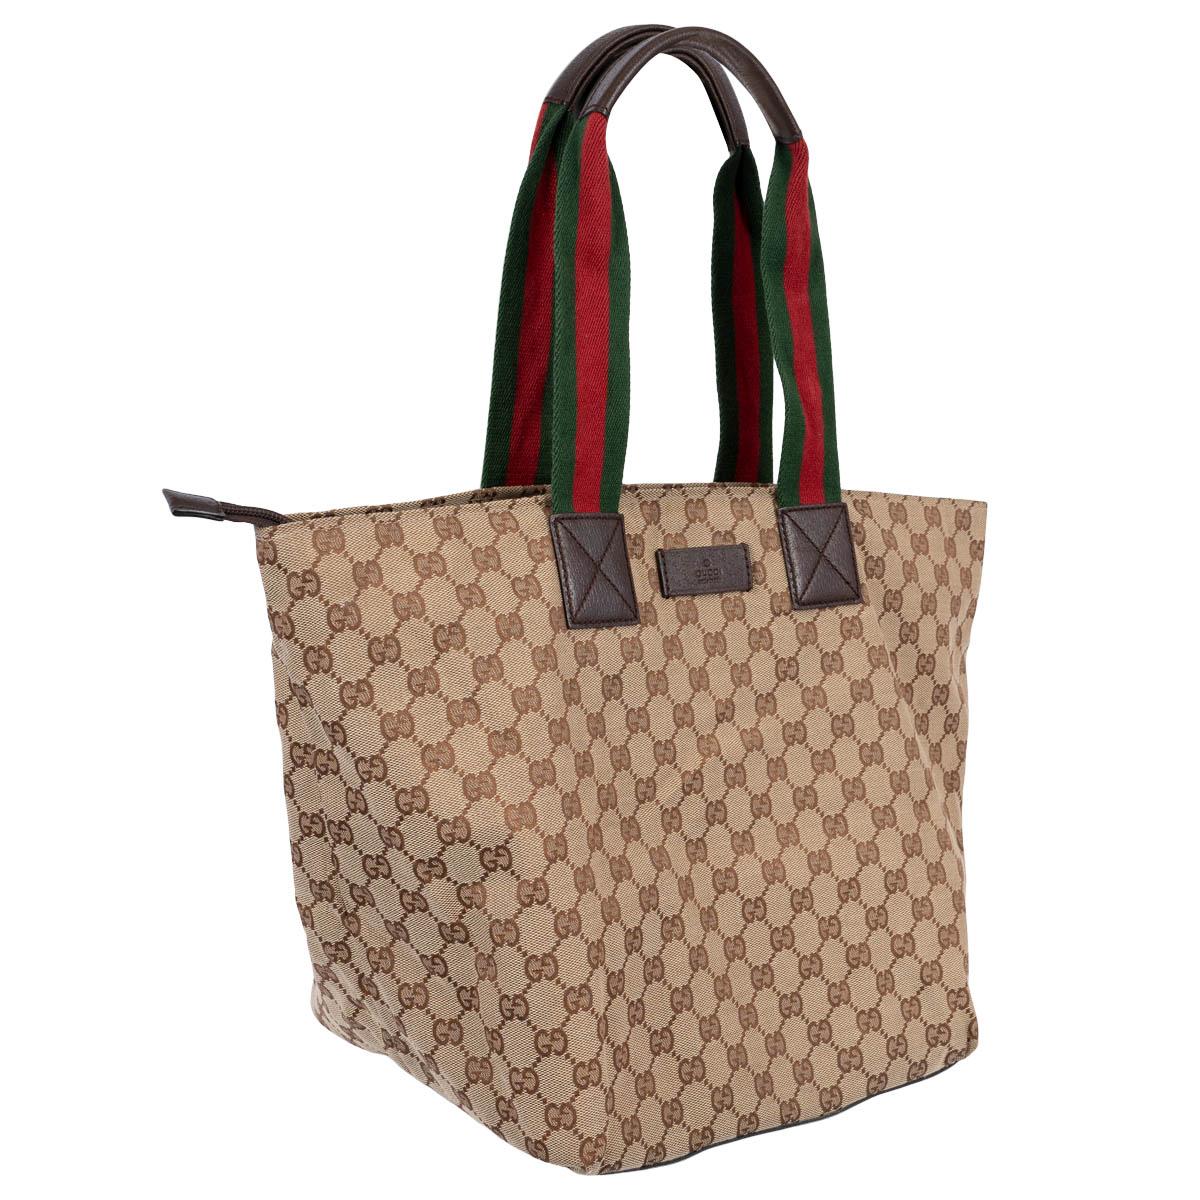 100% authentic Gucci Medium Web tote bag in beige and brown GG monogram canvas with signature Web stripe in green and red and dark brown leather trim. Opens with a zipper on top and is lined in dark brown canvas with one zipper pocket against the